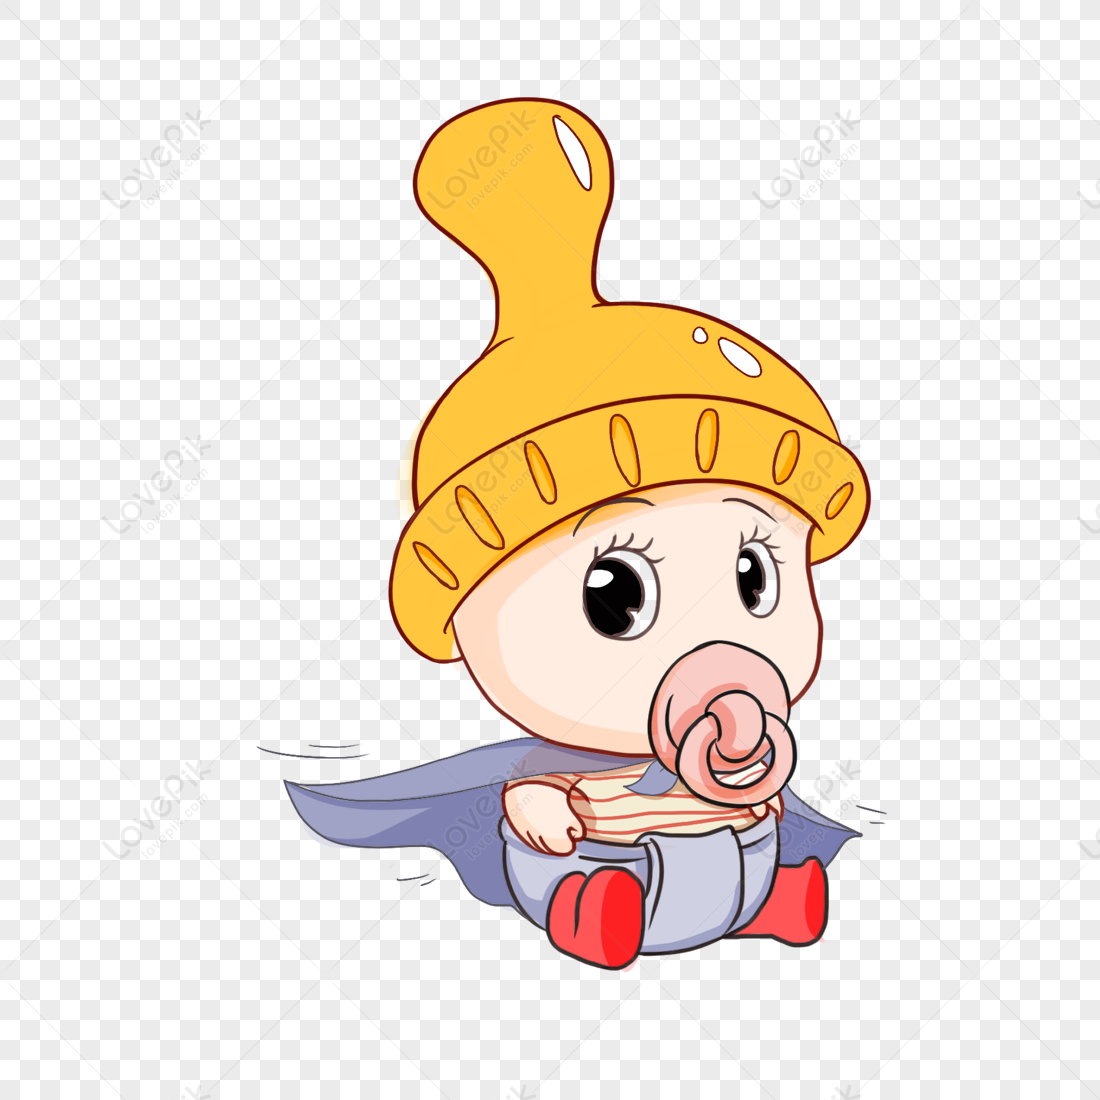 baby, baby hat, baby cartoon, baby comic png image